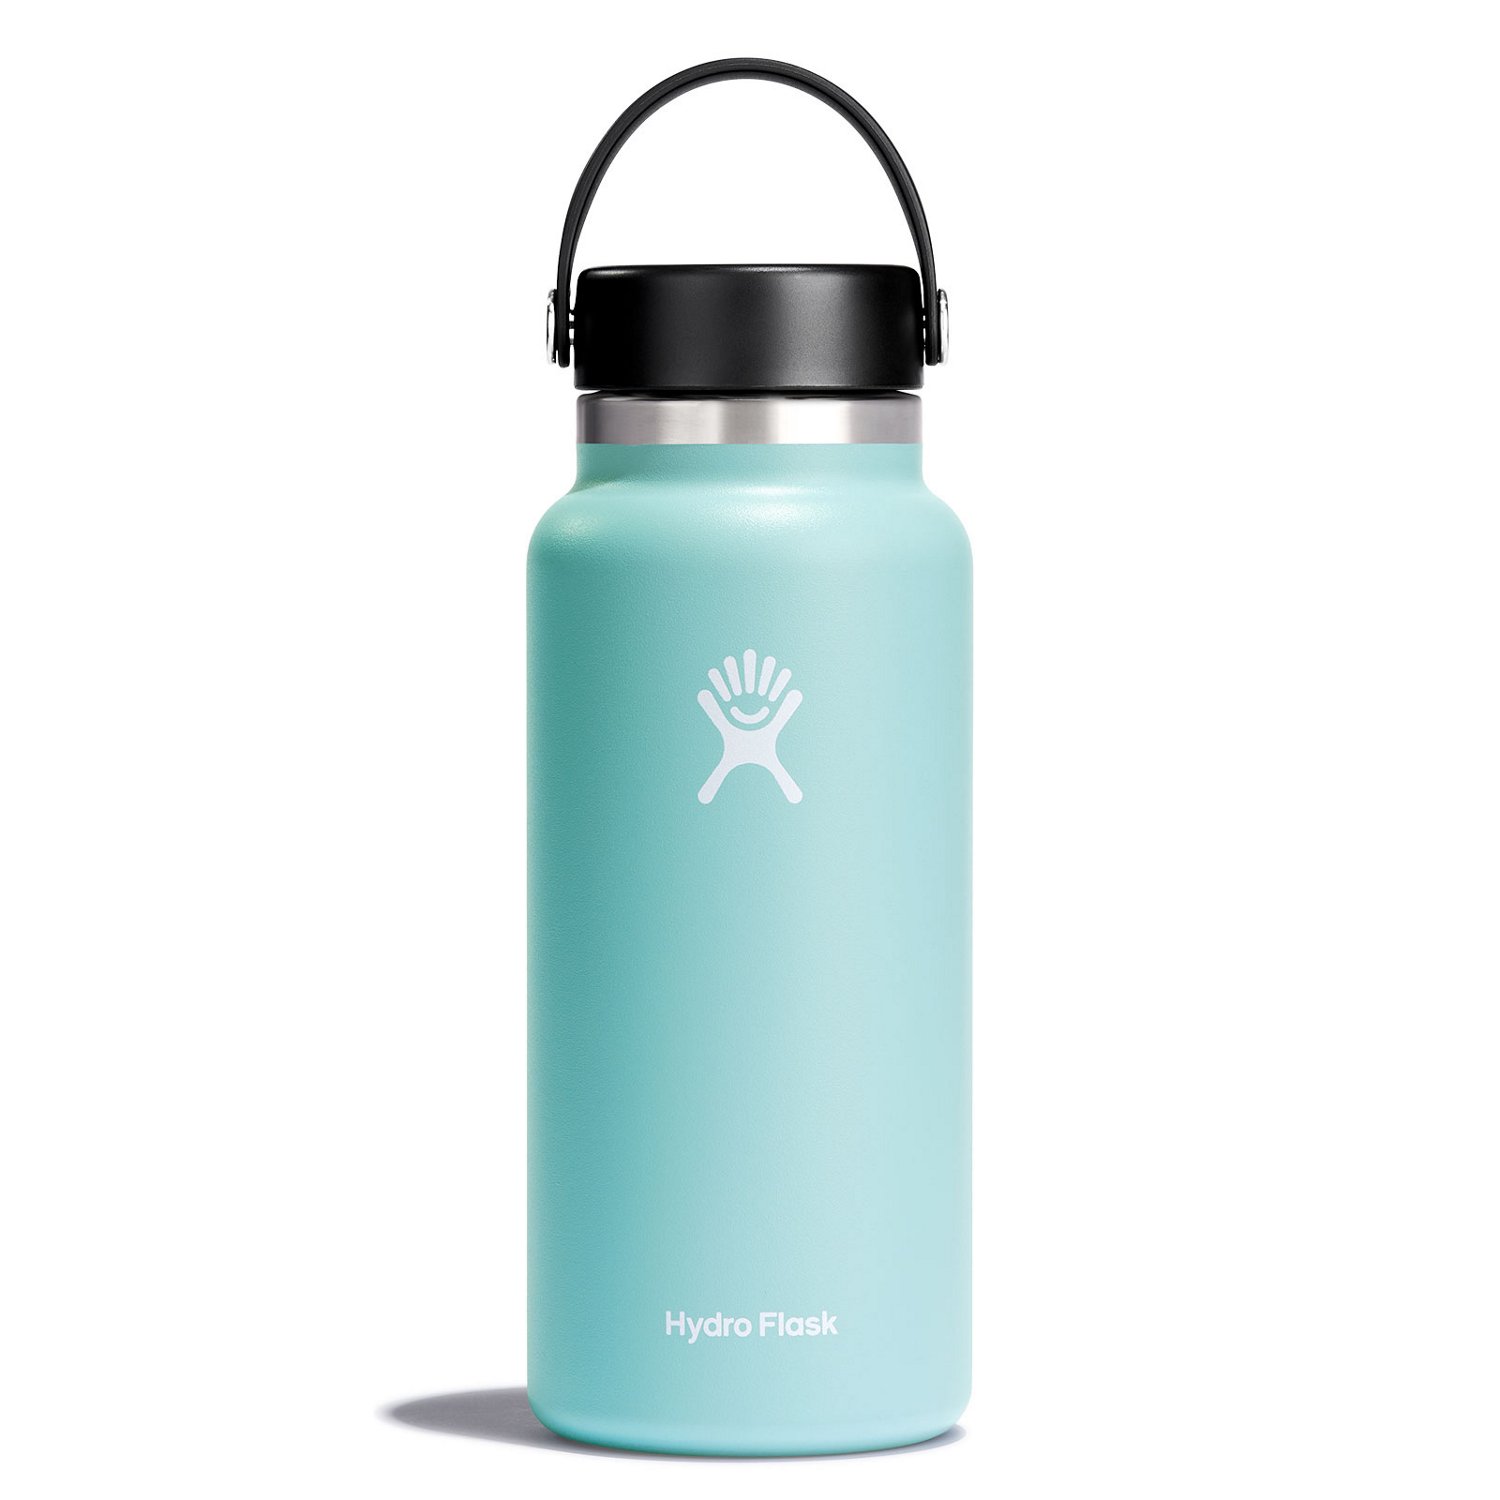 https://academy.scene7.com/is/image/academy///camping/drinkware/blue_hydro-flask-wide-mouth-2.0-32-oz-bottle-with-flex-cap_w32bts441/aa0afe4eeffc4b3bbf1c2dd3086143af